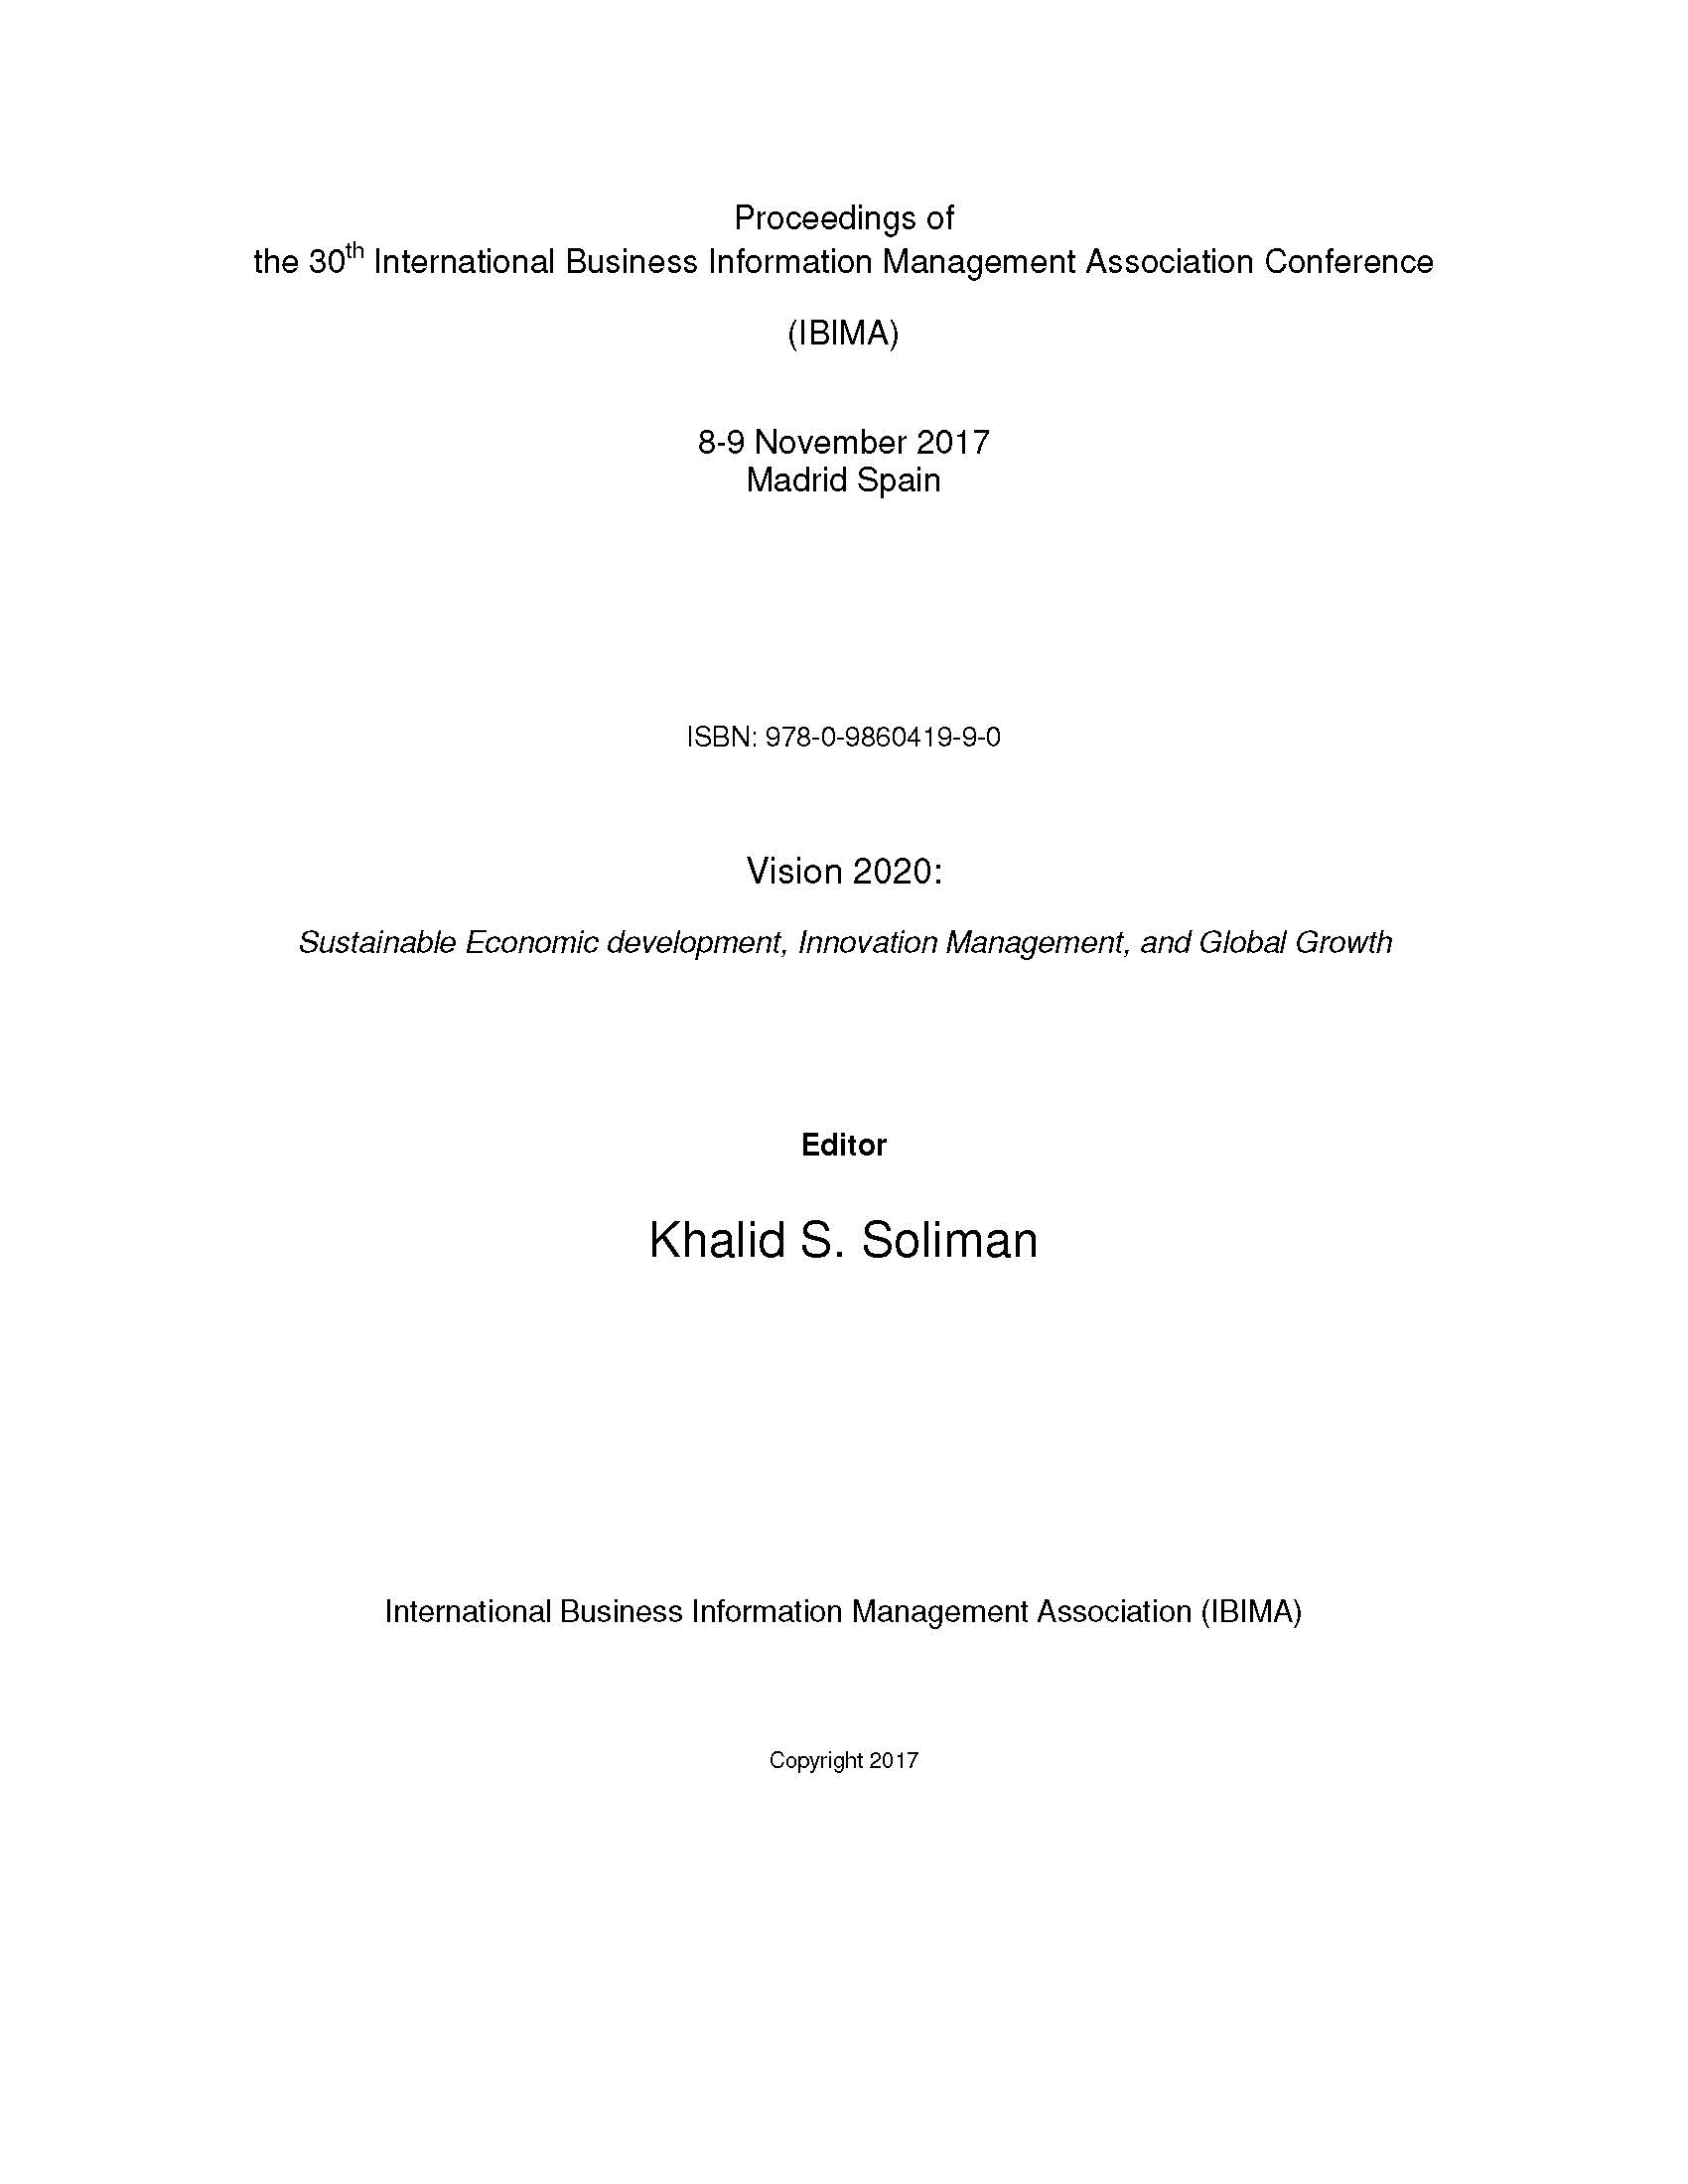 Proceedings of the 30th International Business Information Management Association Conference